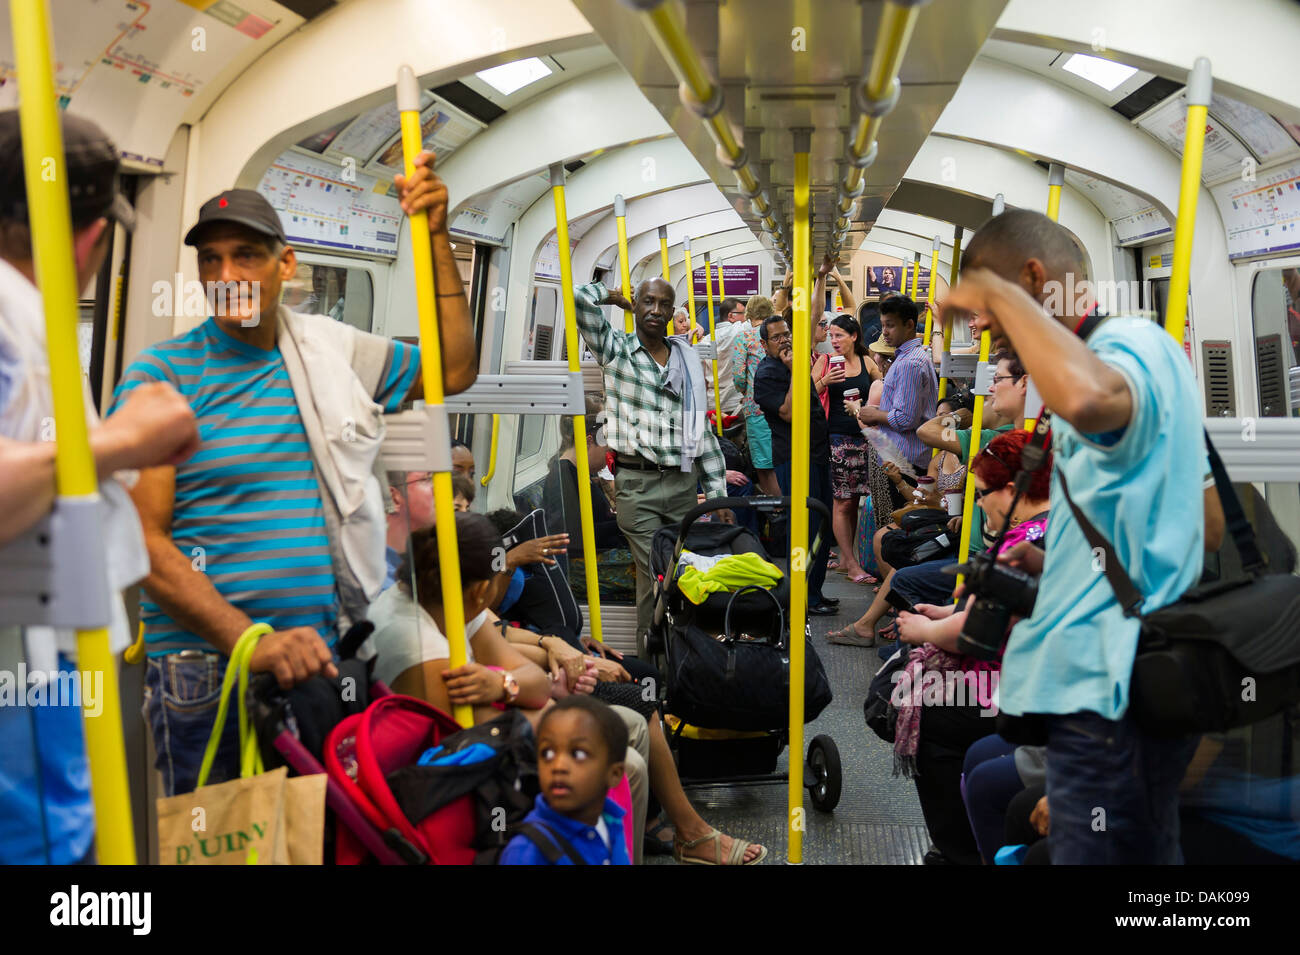 Passengers in a tube train carriage in London. Stock Photo